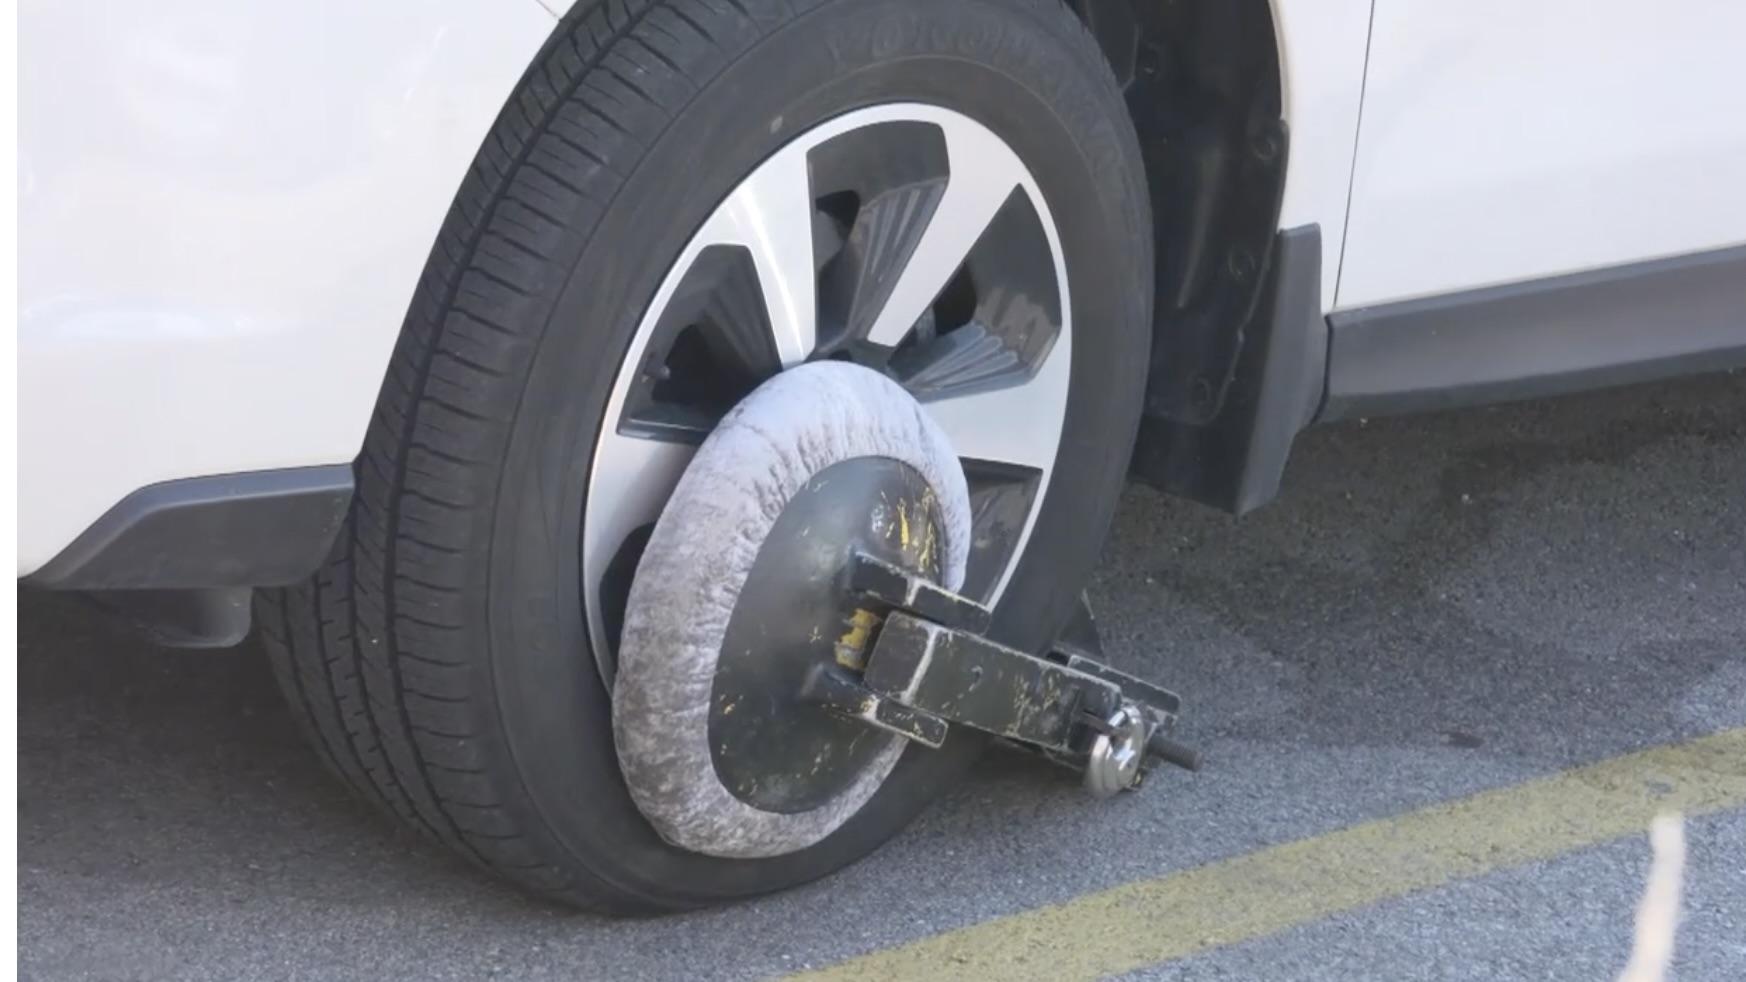 An Innovative Parking Solutions boot immobilizing a car in a North Side parking lot. (WTTW News)